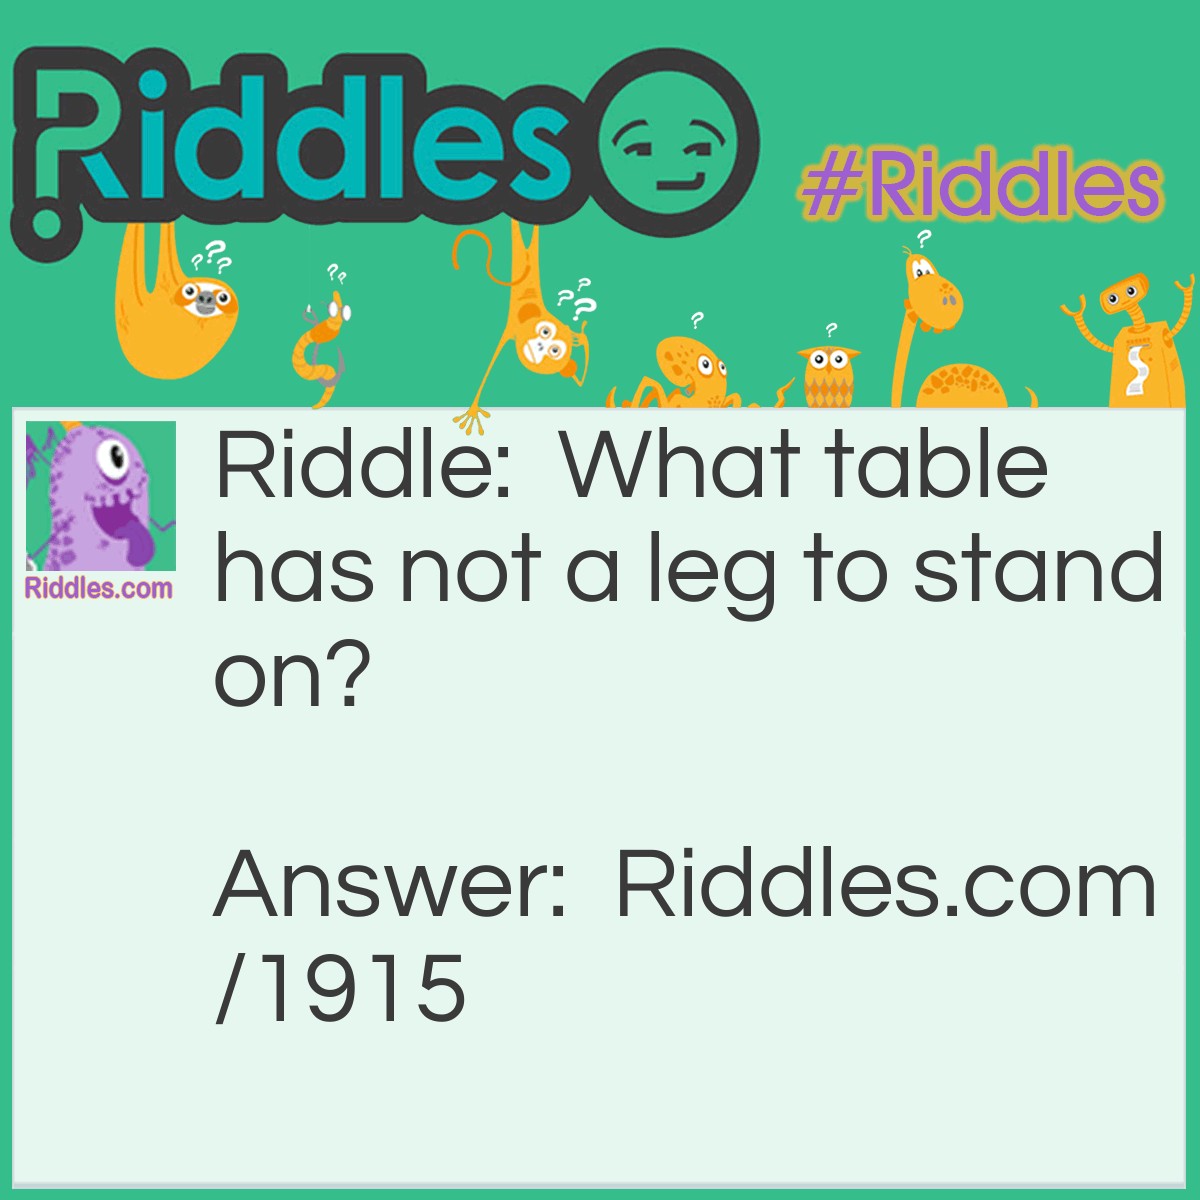 Riddle: What table has not a leg to stand on? Answer: The multiplication table or periodic table of elements.